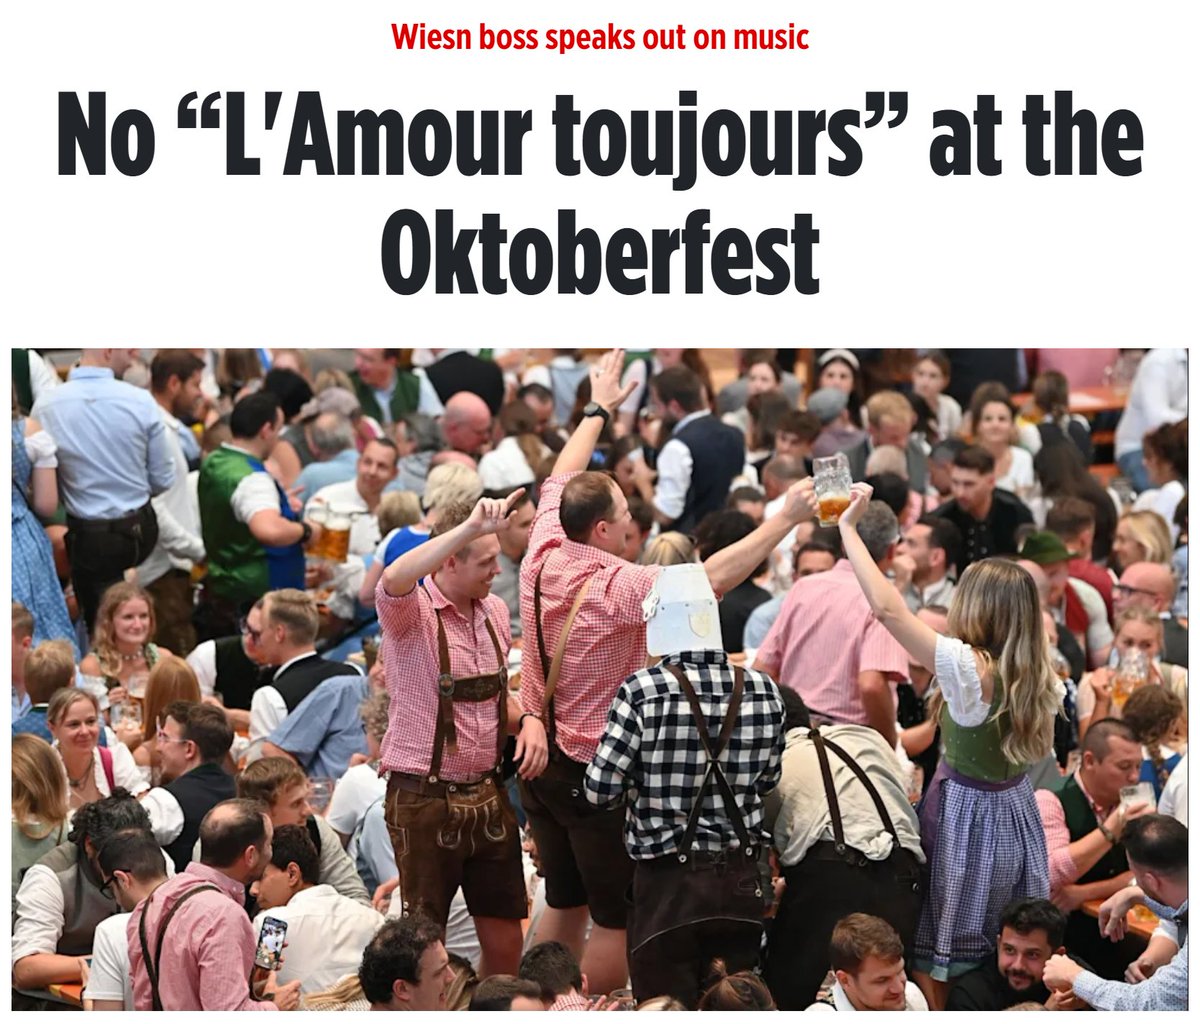 NEW - Song 'L'Amour toujours' by Gigi D'Agostino is banned from the upcoming Oktoberfest in Bavaria because some Germans could sing 'Germany for the Germans, foreigners out' to it.